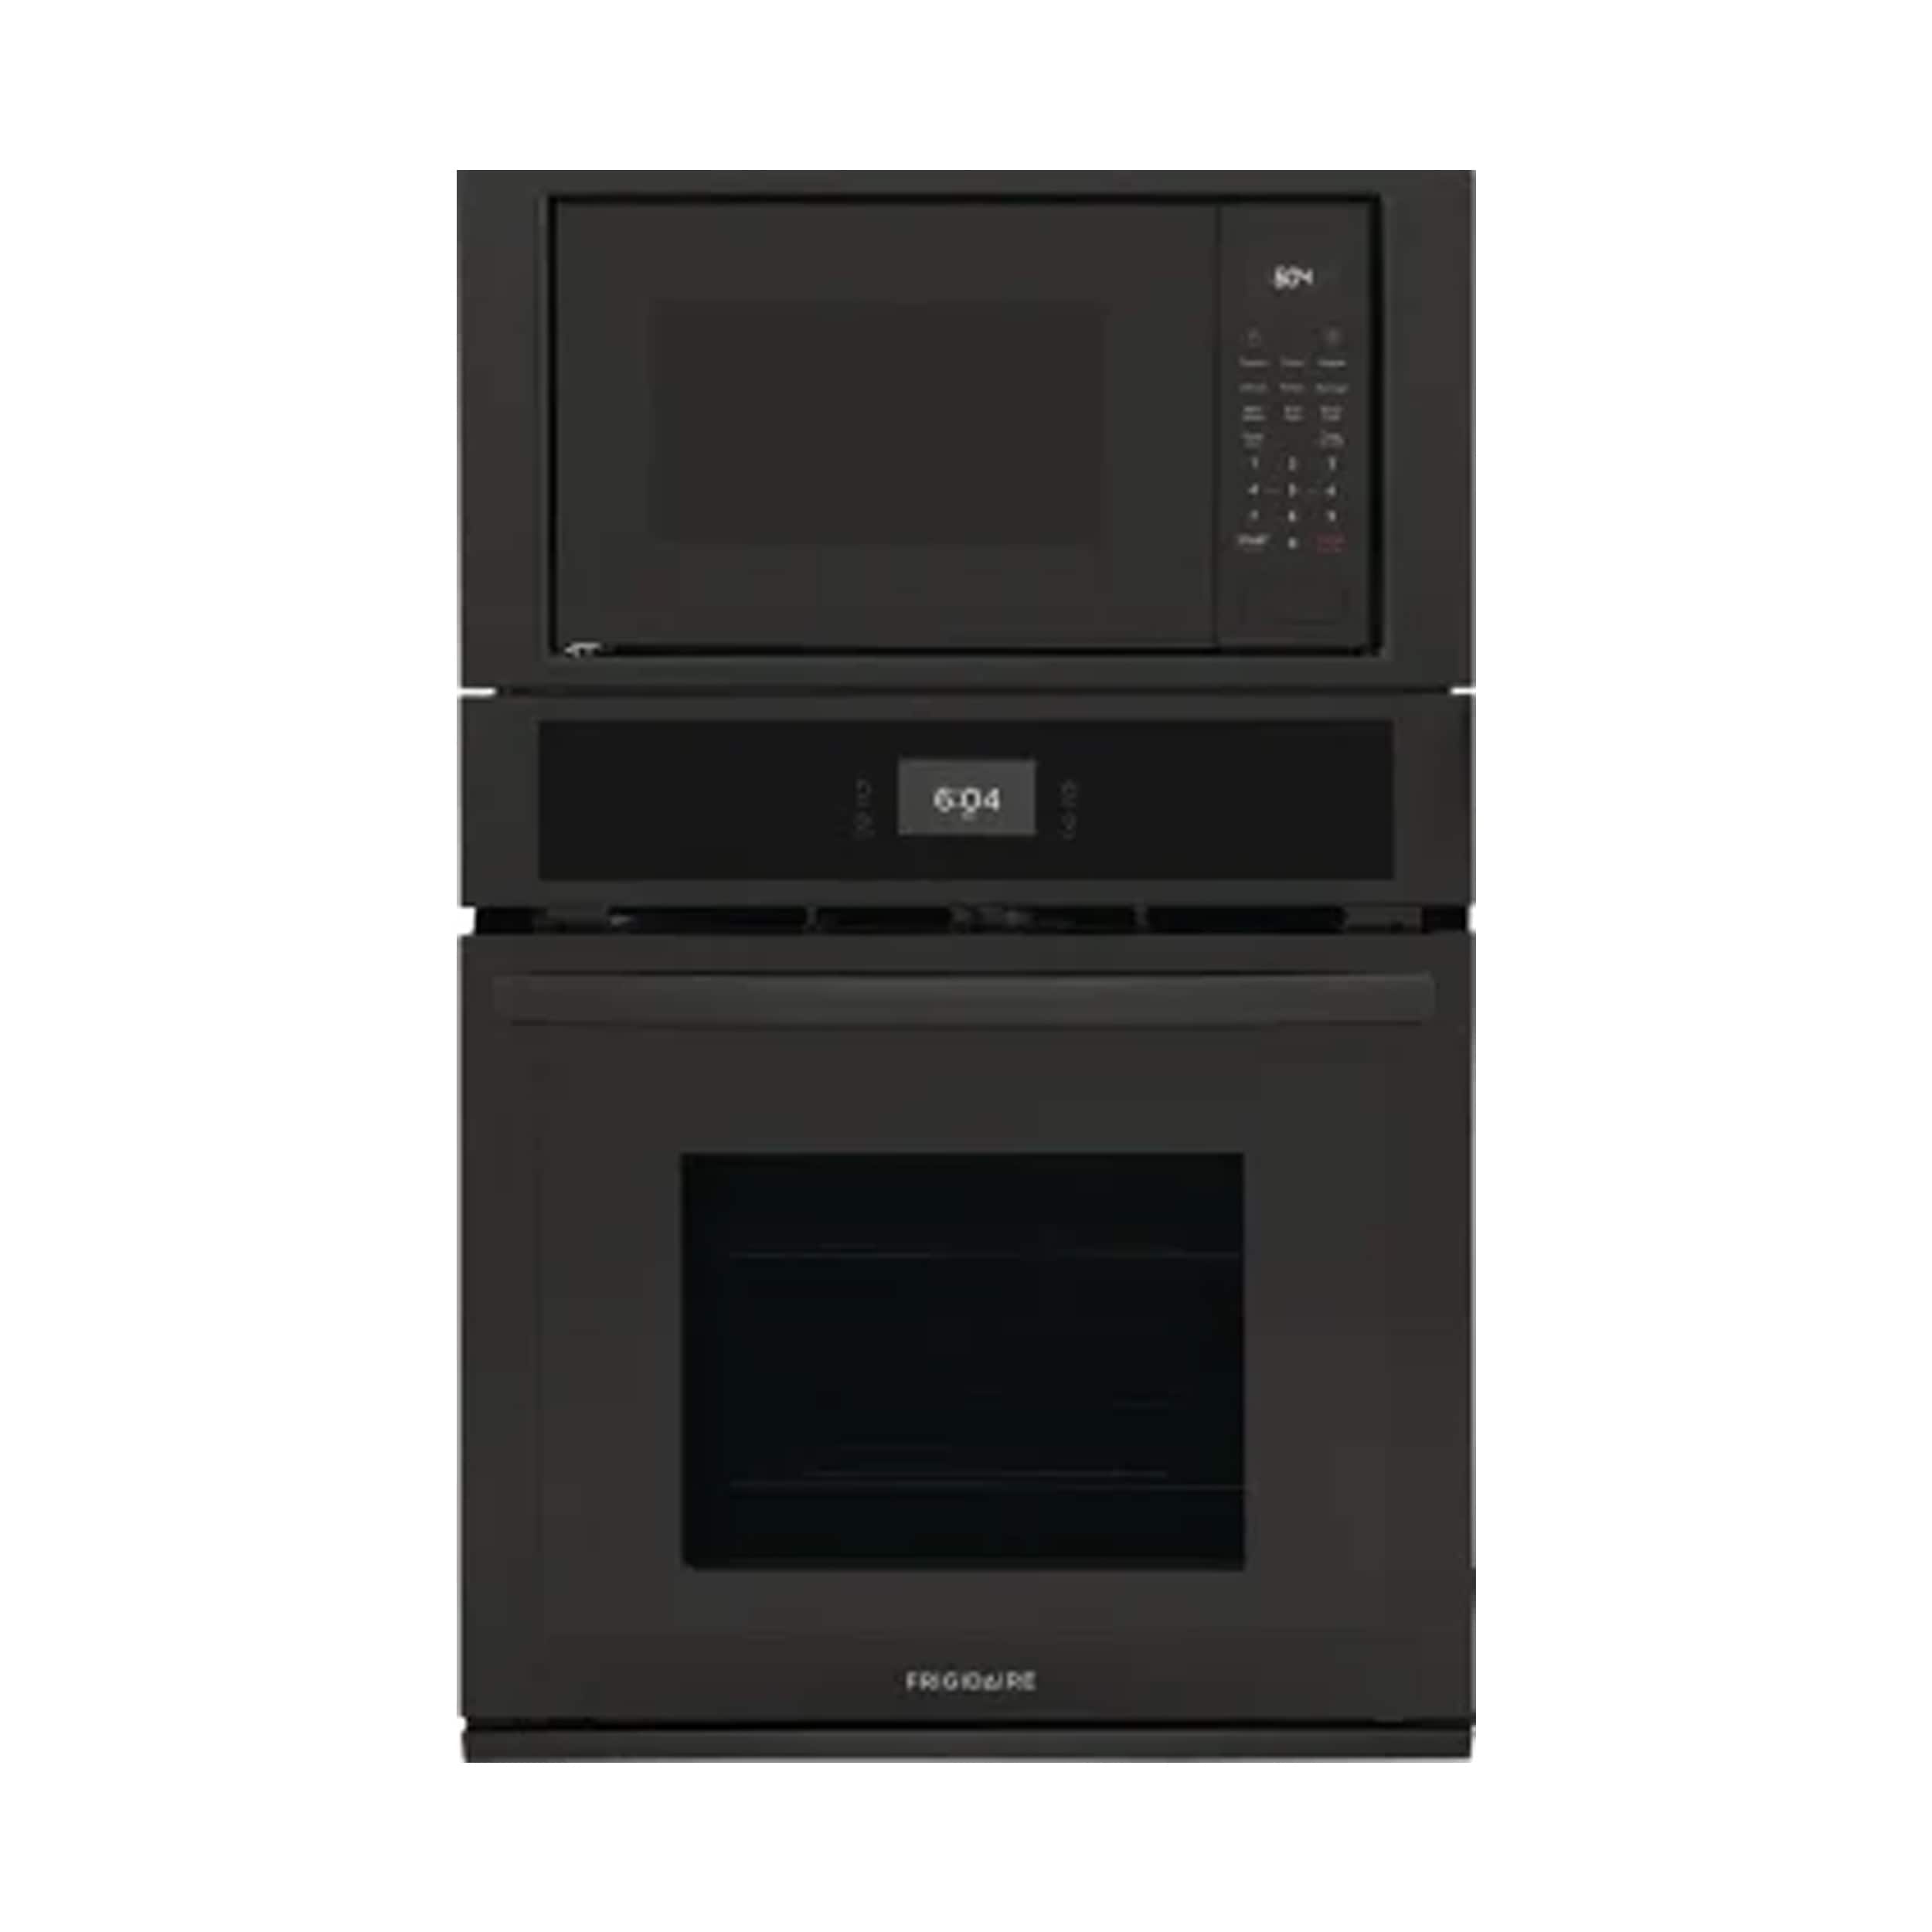 Frigidaire 27IN ELECTRIC WALL OVEN/MICROWAVE COMBINATION Option 1